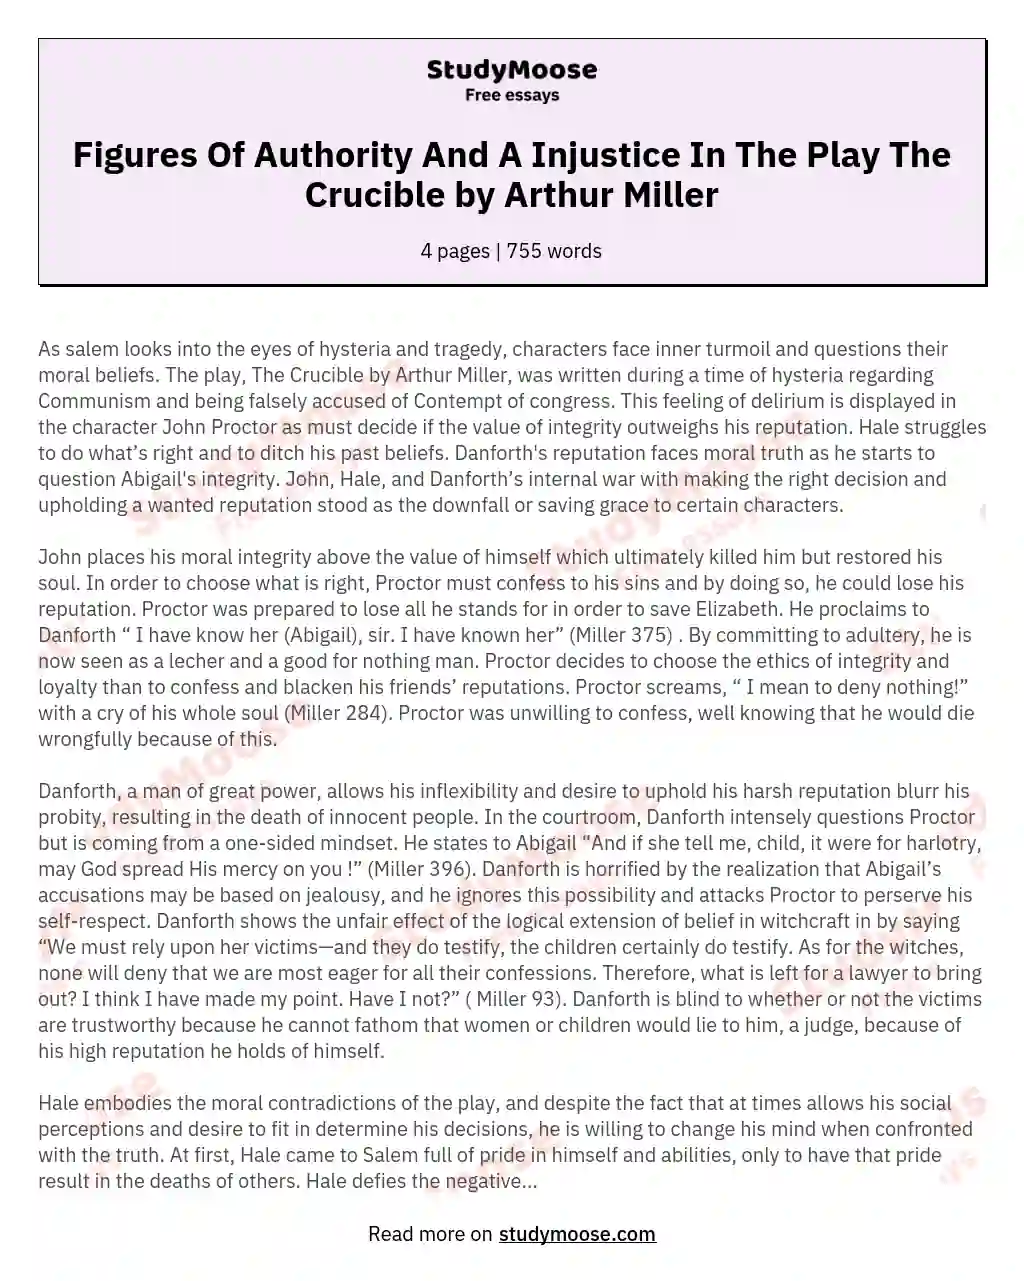 Figures Of Authority And A Injustice In The Play The Crucible by Arthur Miller essay